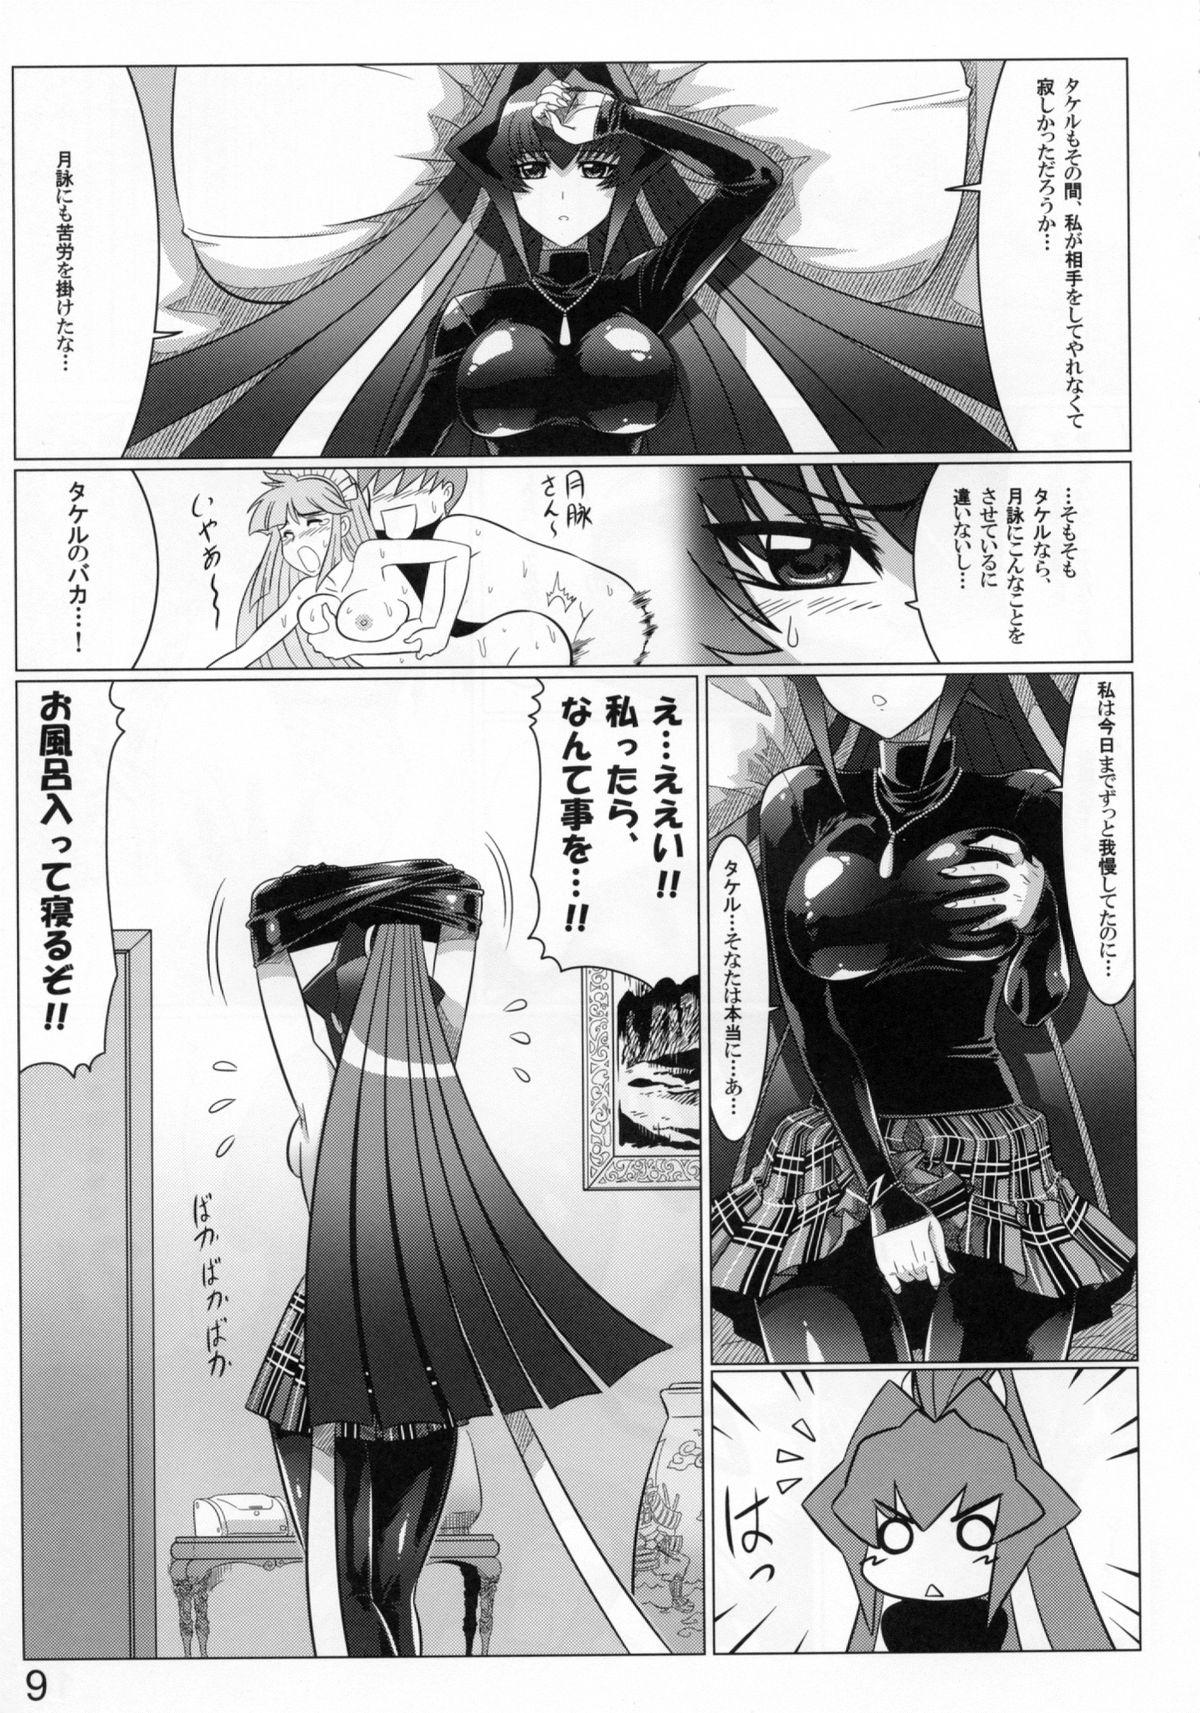 Watersports Midnight Terrorist - Muv luv Young - Page 9